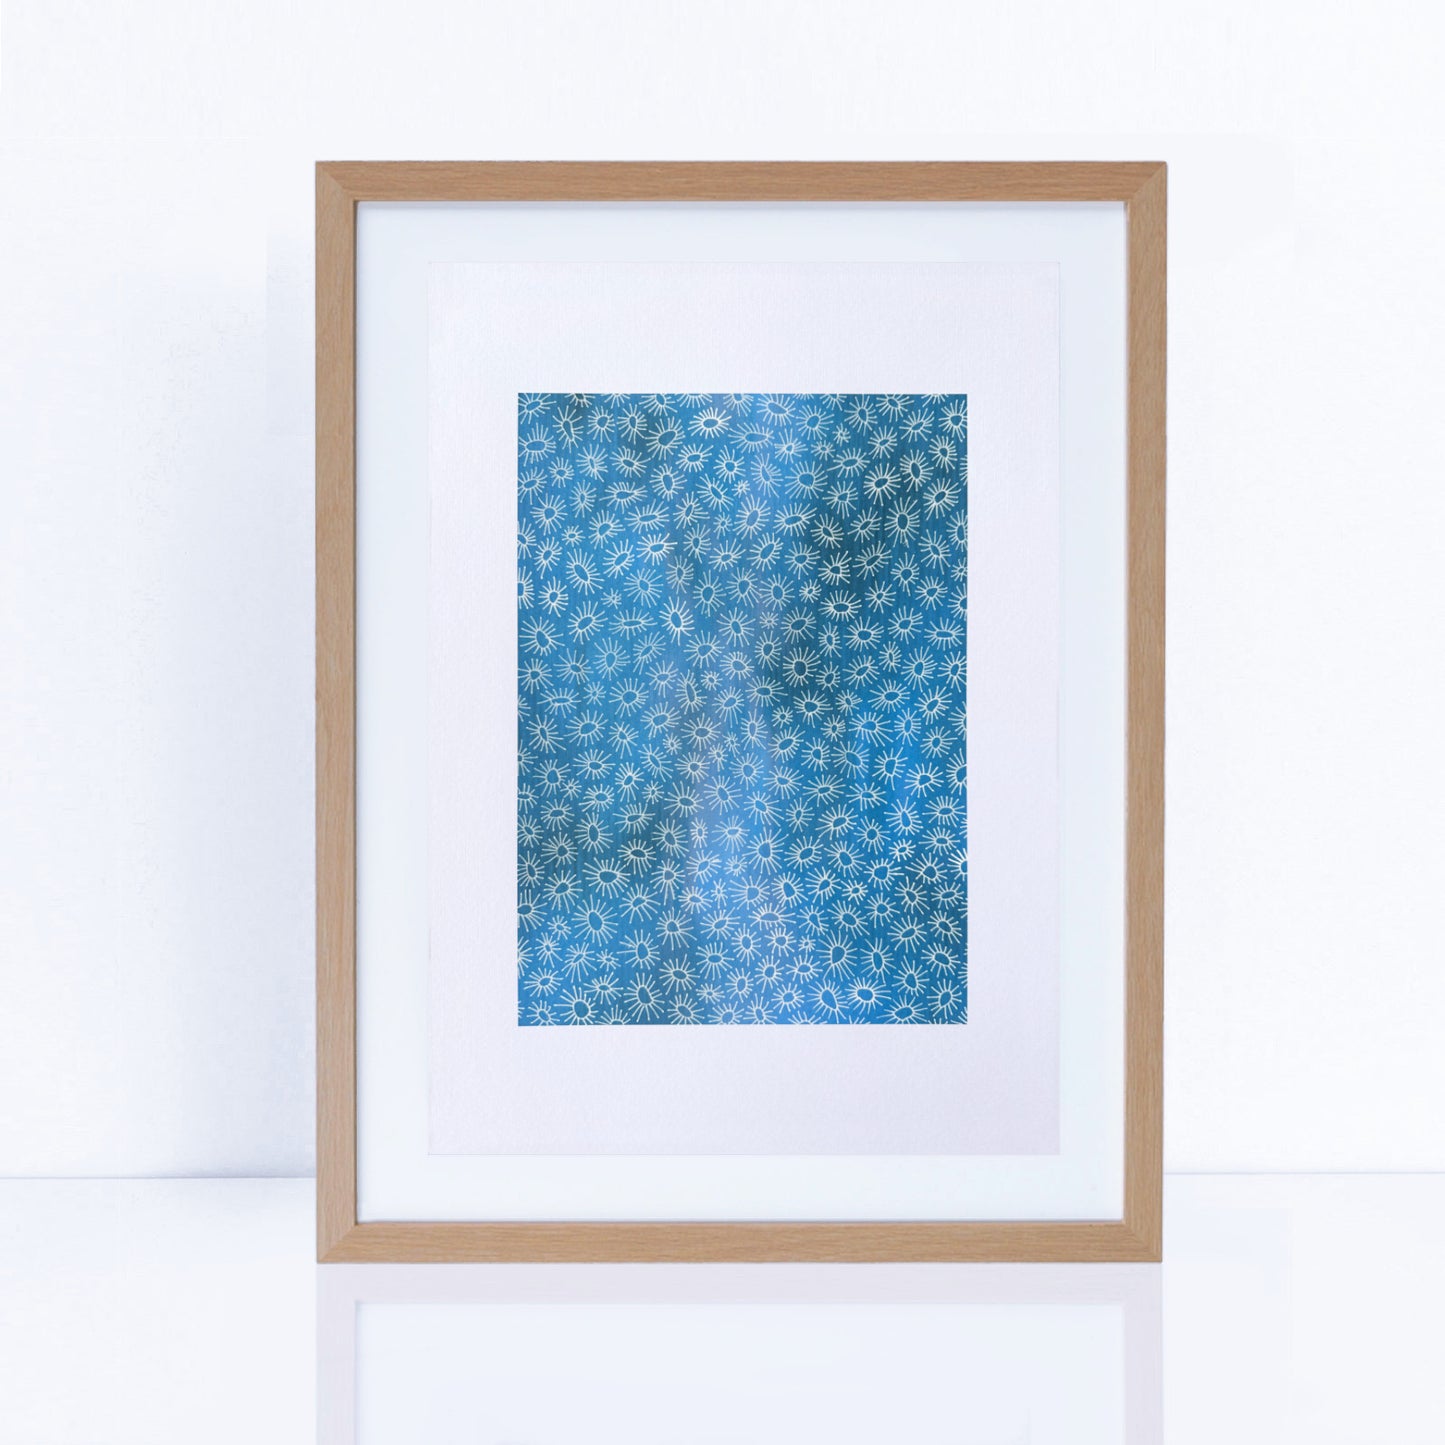 tranquil artwork in blues and delicate white design in a frame